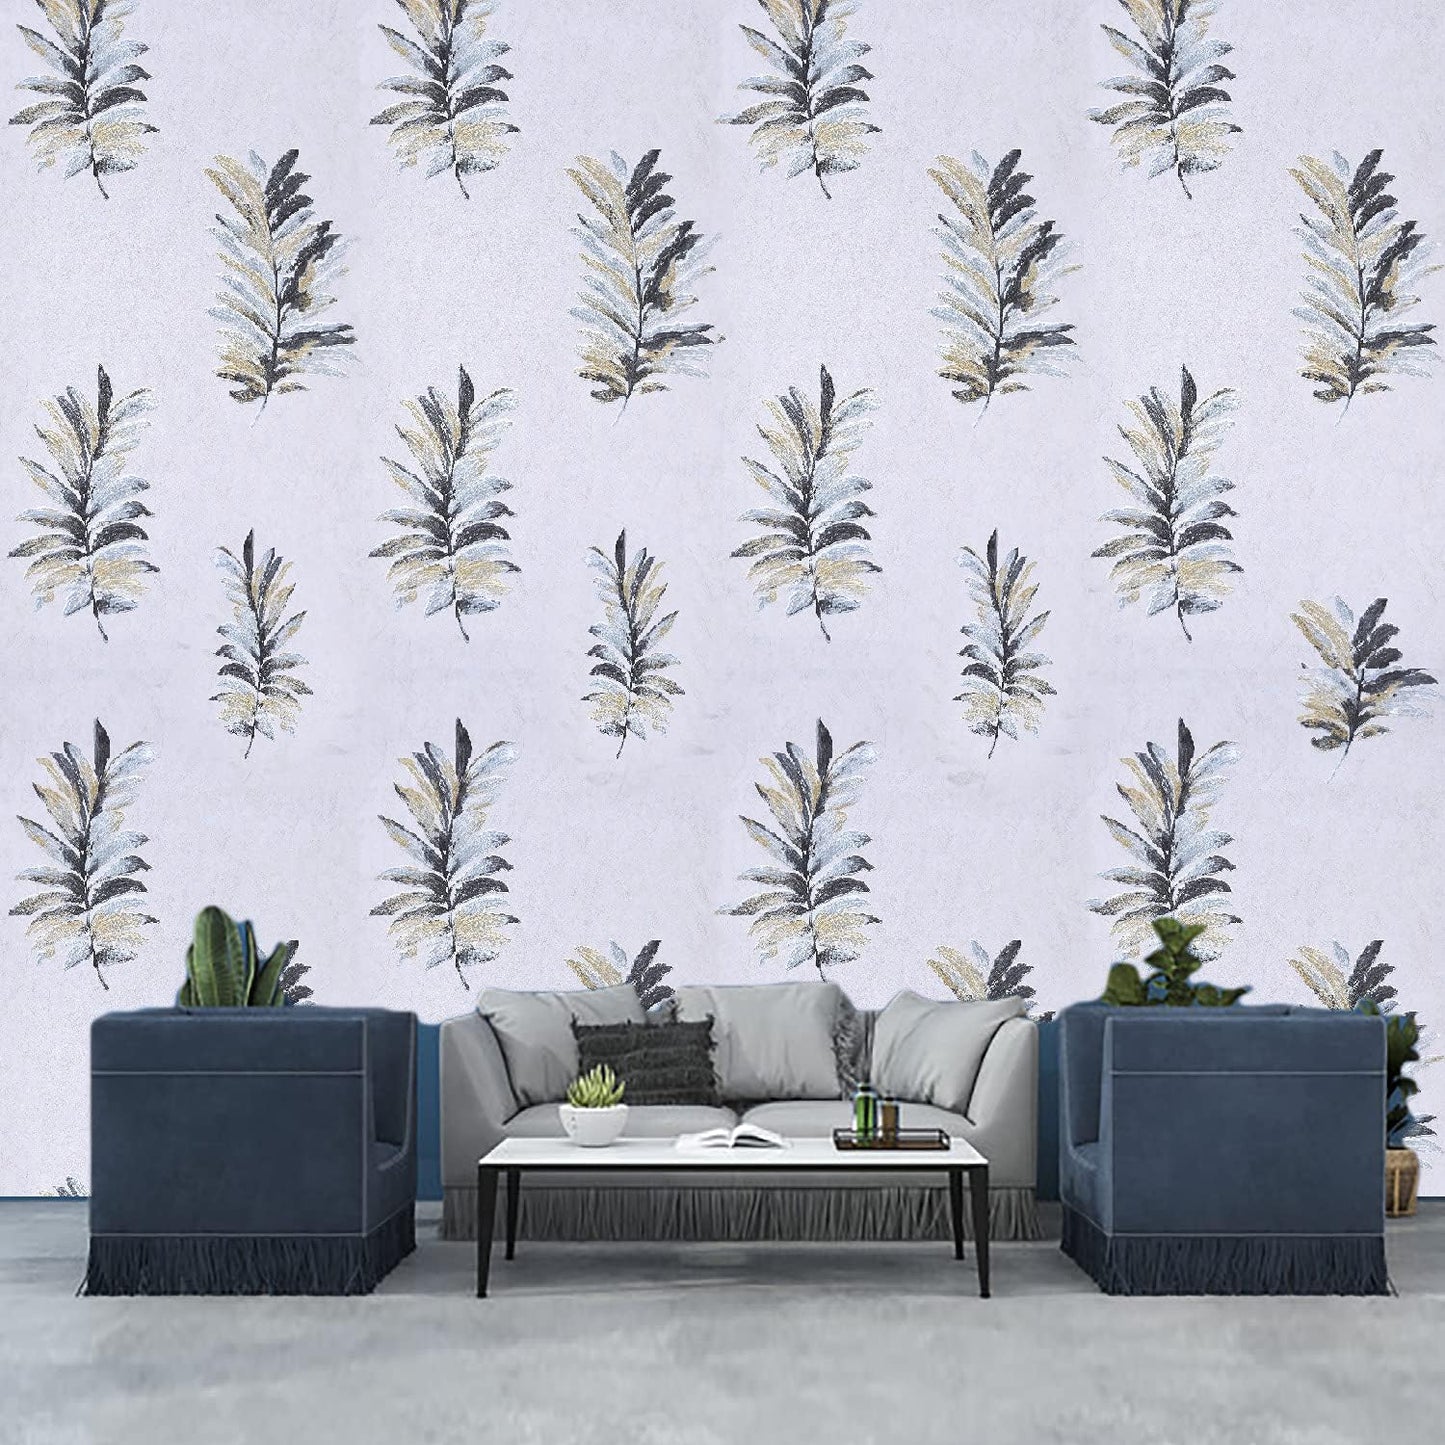 3D Latest Fern Design Blue & Brown Wallpaper Roll for Home Walls 57 Sq Ft (0.53m or 21 Inches x 10m or 33 Feet)